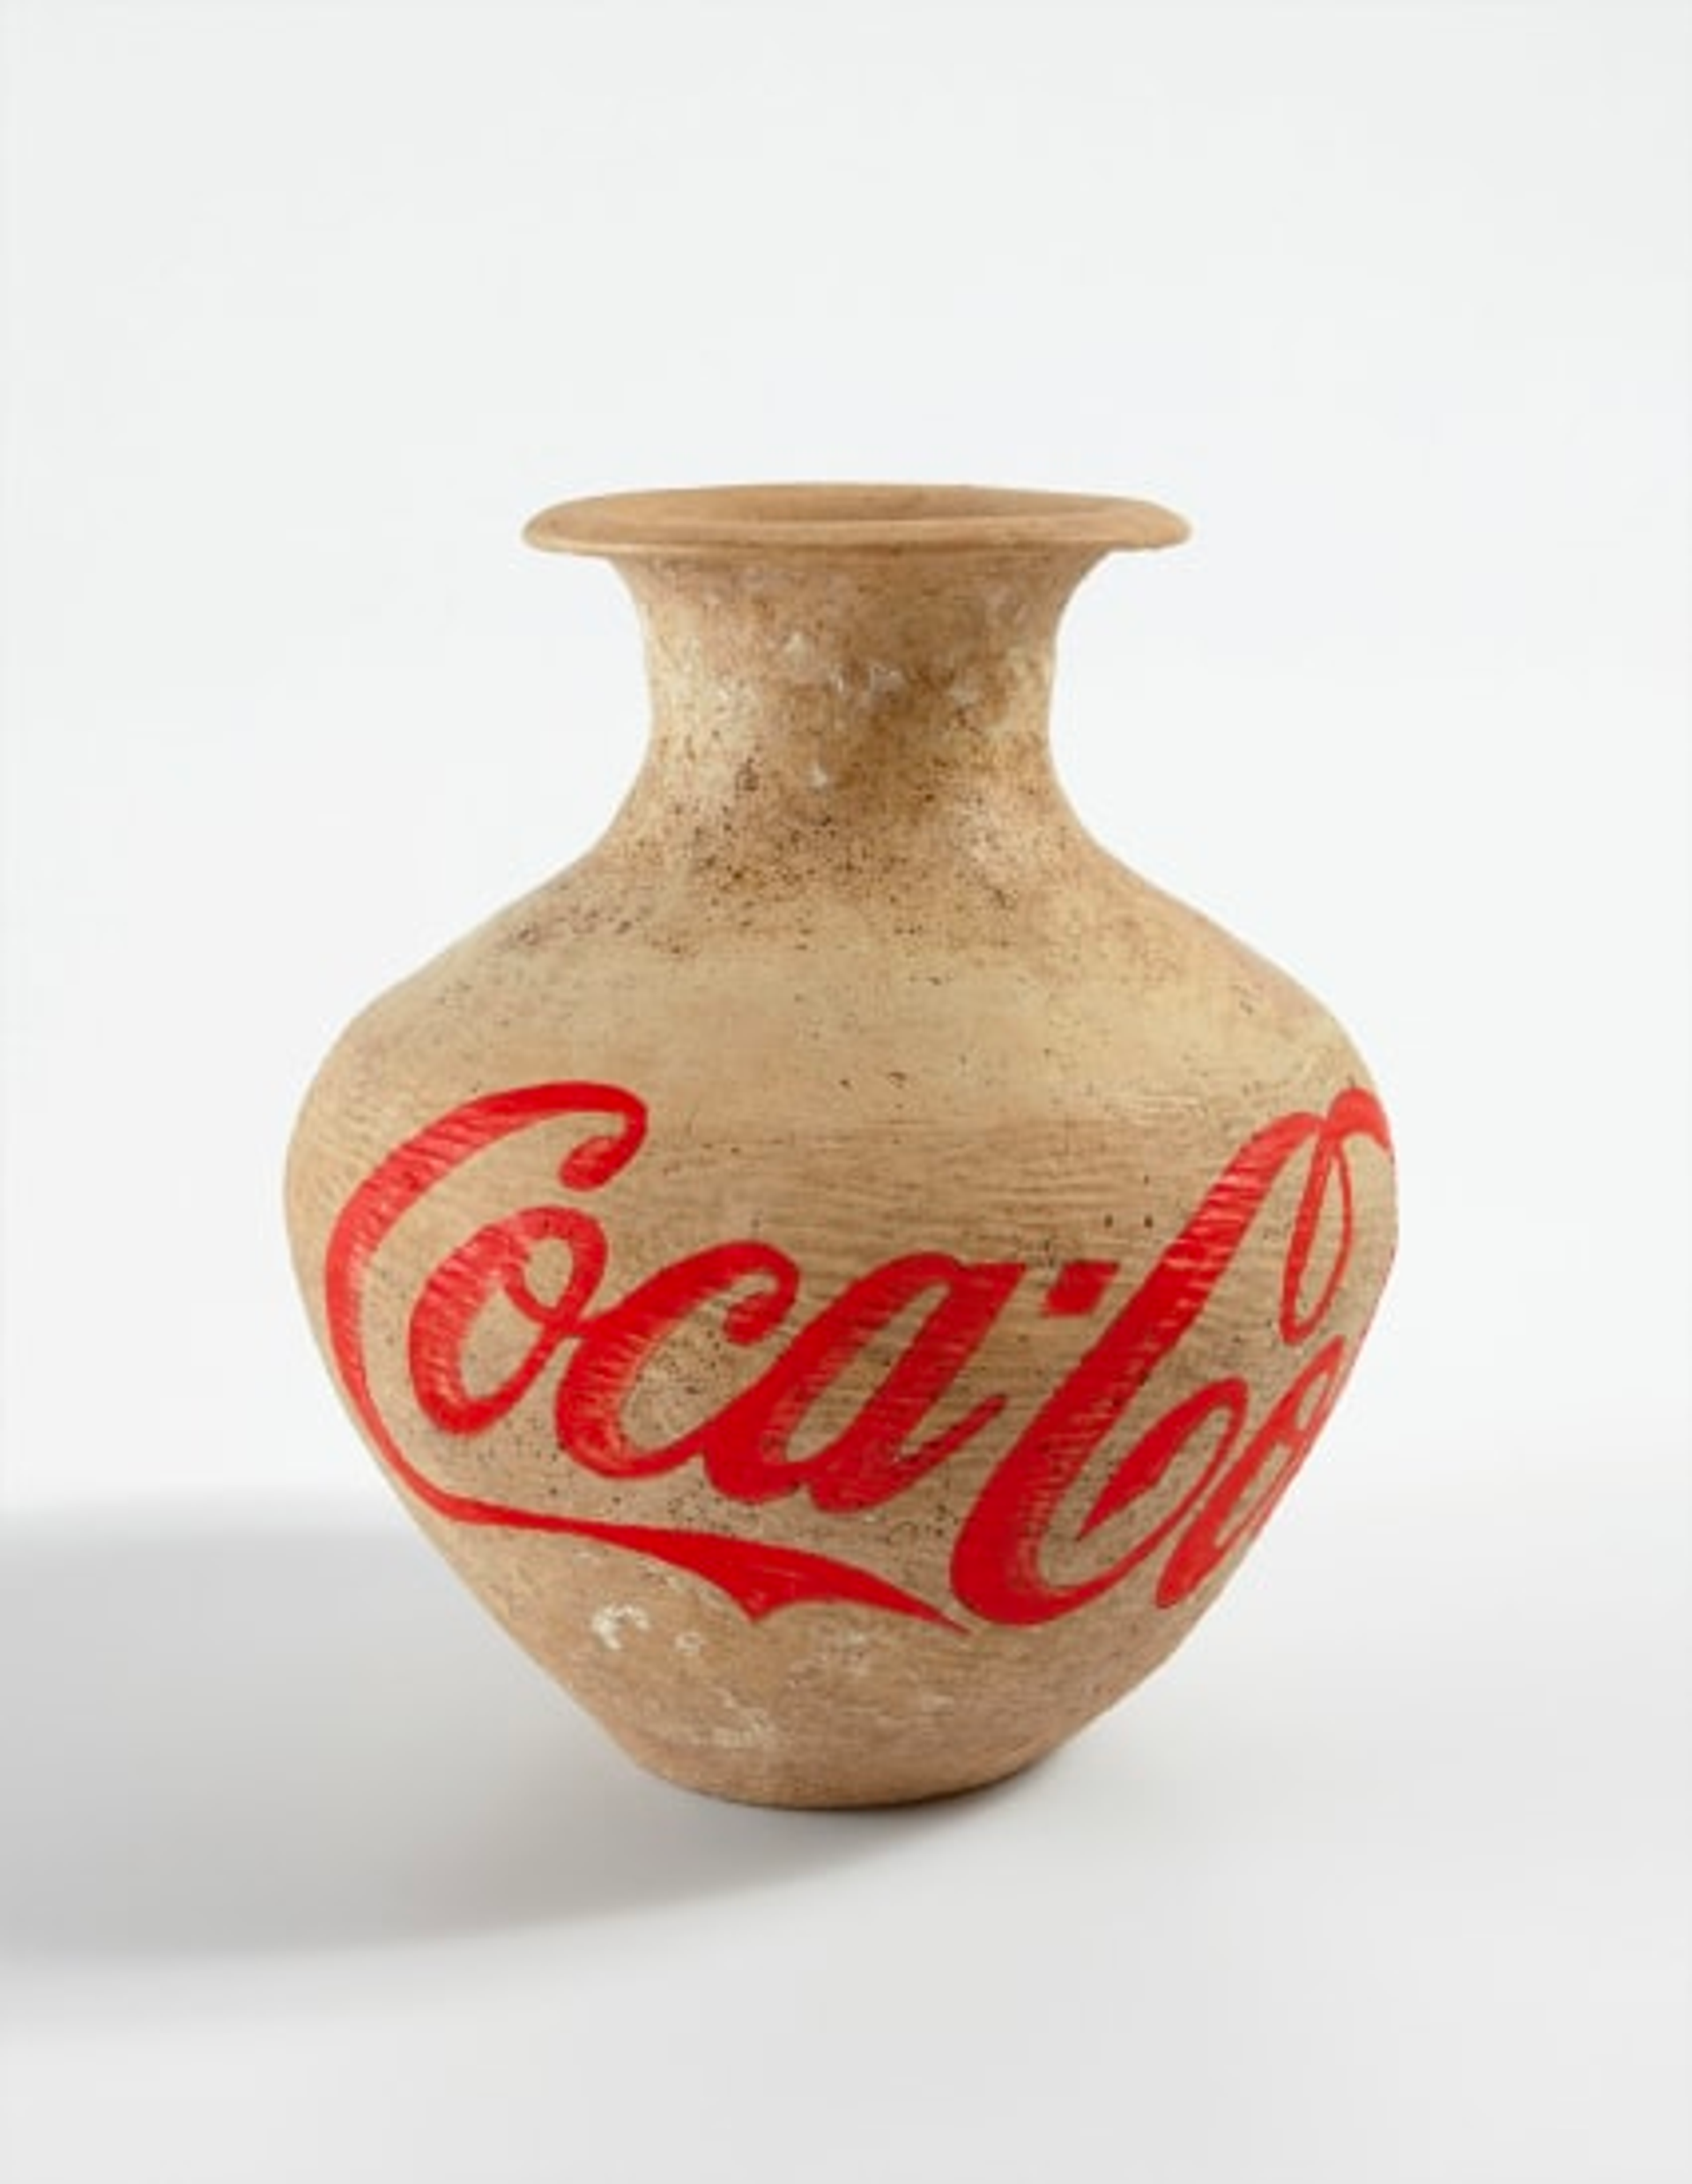 A coloured photograph displaying an antique Chinese urn featuring the stenciled "Coca-Cola" logo in red on the front, creating an intriguing juxtaposition of traditional and contemporary elements.